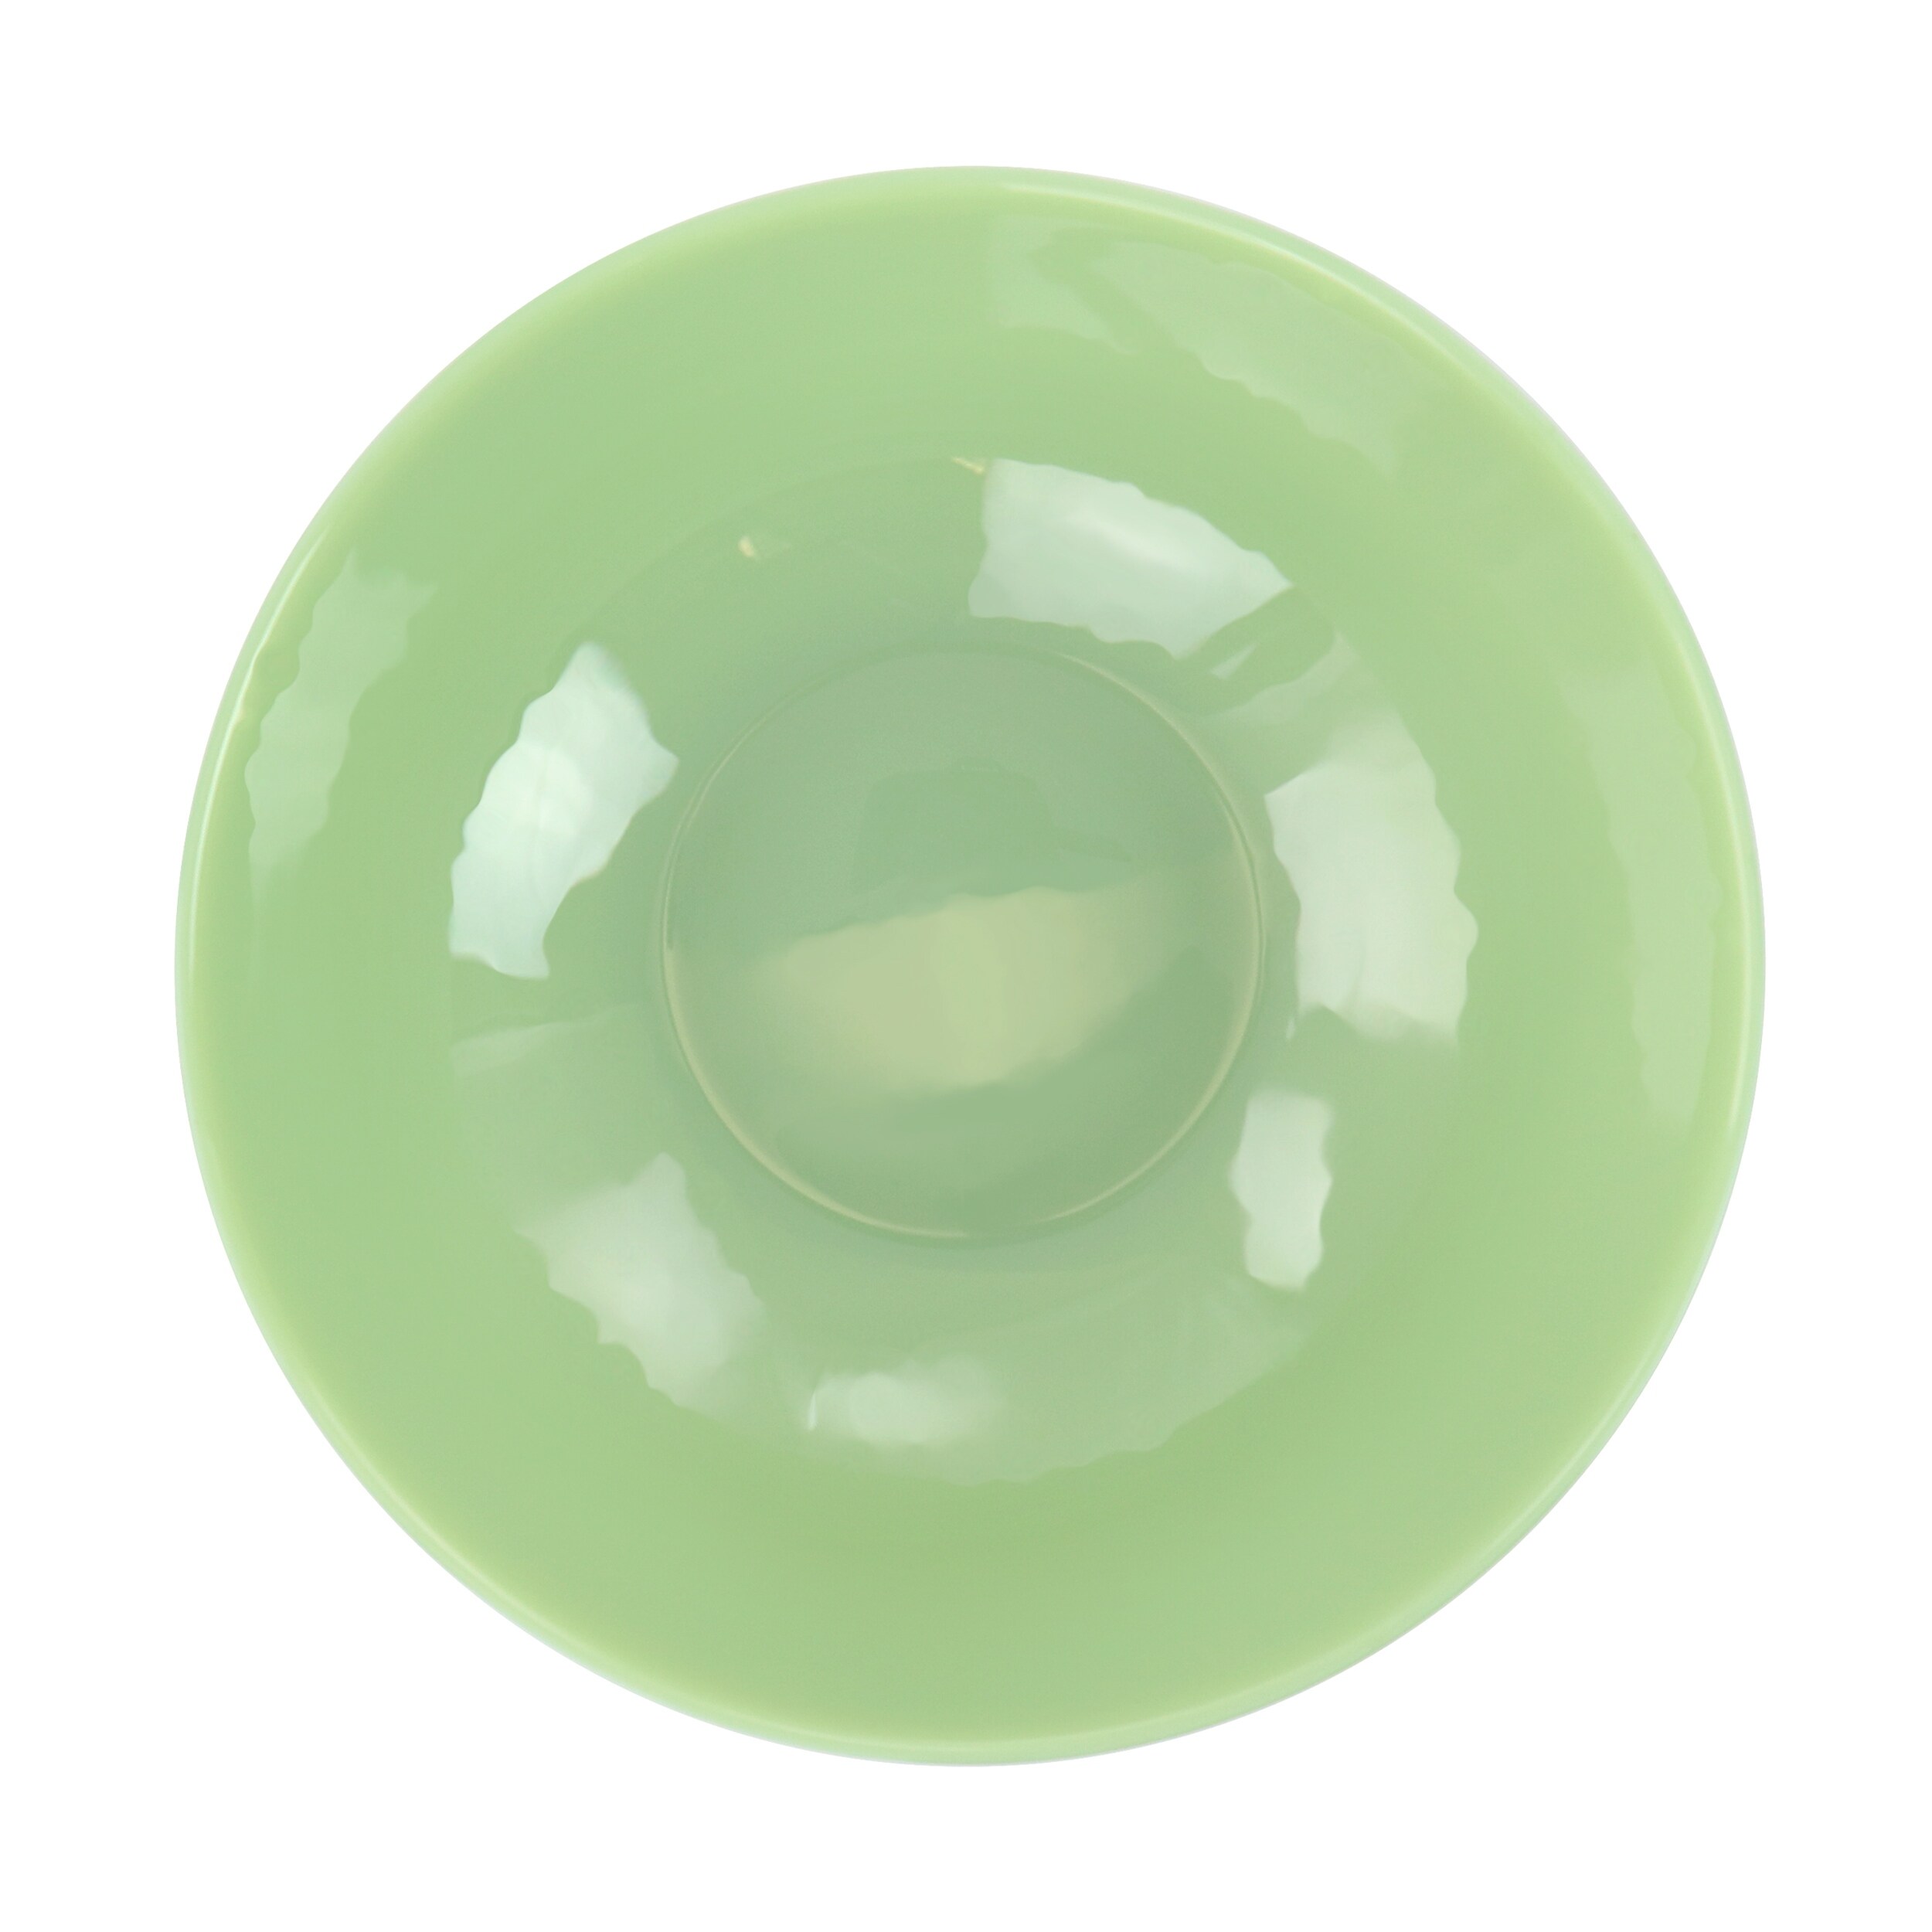 https://ak1.ostkcdn.com/images/products/is/images/direct/bf7403445d91a145b4a51eaf06c2f27b1bbbad60/Martha-Stewart-2-Piece-8-Inch-Jadeite-Glass-Serving-Bowl-Set-in-Jade-Green.jpg